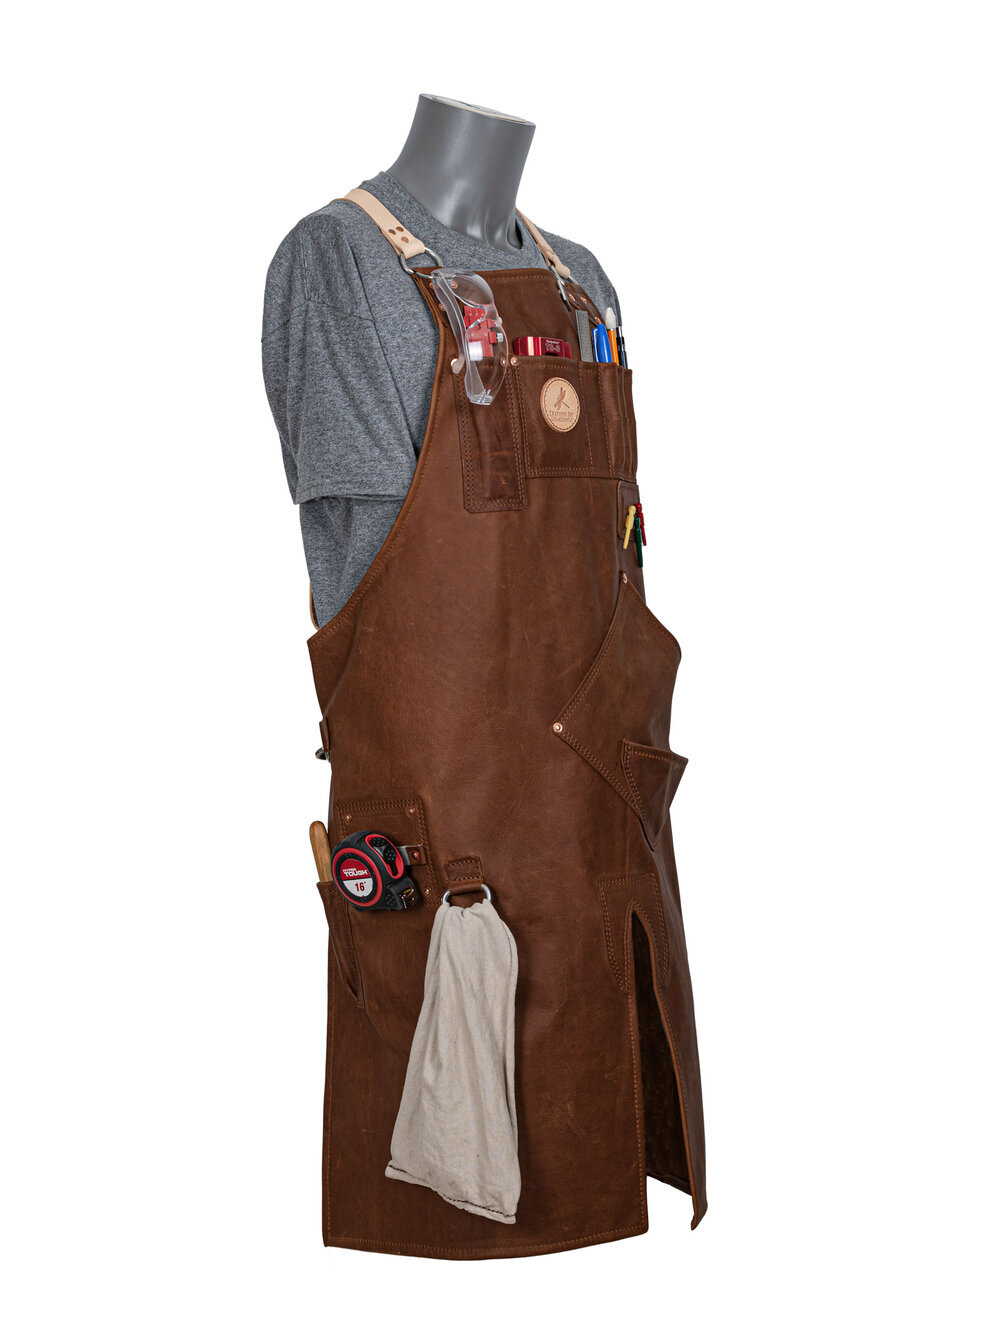 Modern Split leg Leather Work Apron with Ring and Belt Buckle|Made To Measure 